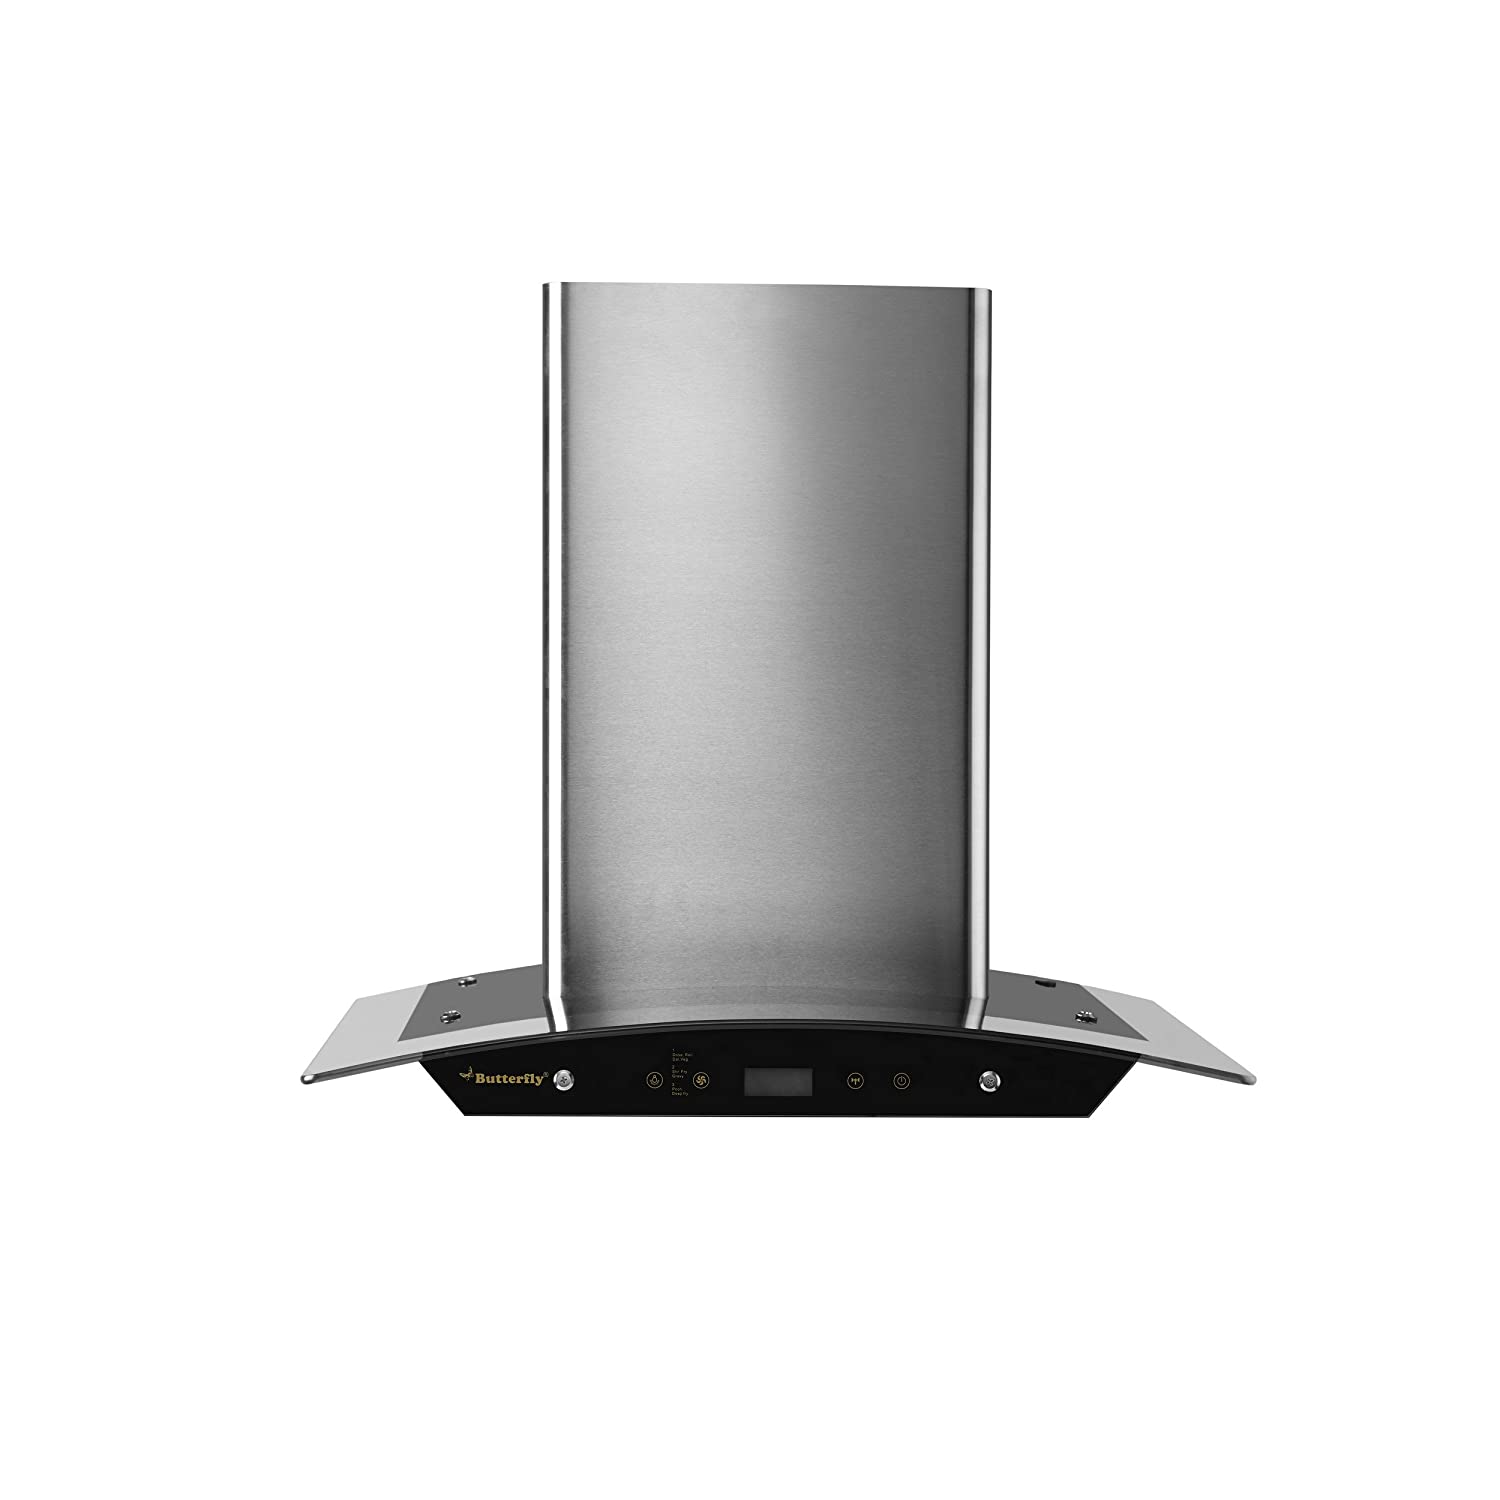 Butterfly 60cm 1200 m3/hr Chimney (Reflection, 1 Baffle Filter, Touch Control, Steel/Grey)